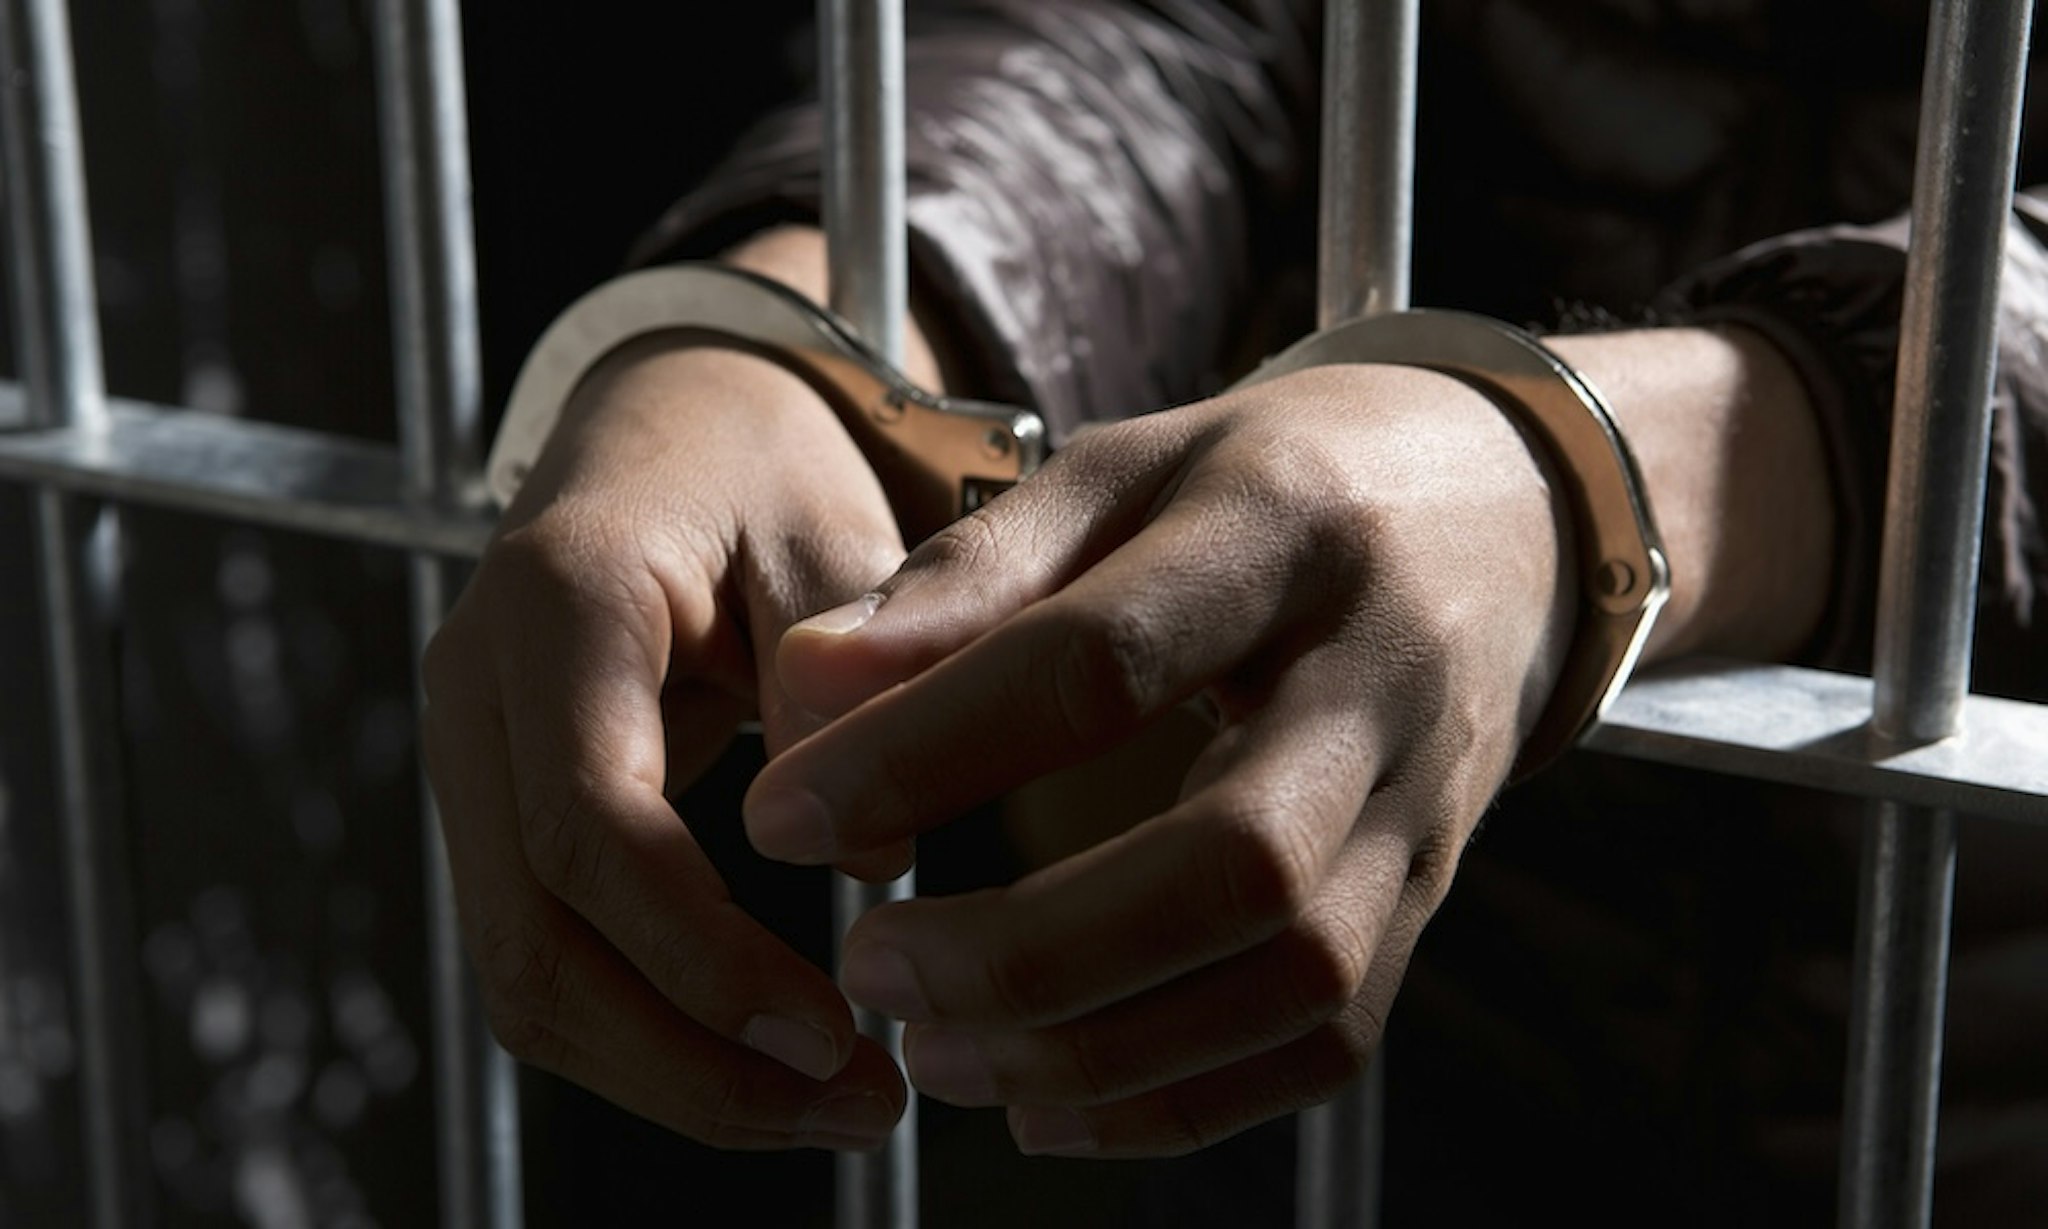 A prisoner behind bars with hands cuffed -- Caspar Benson via Getty Images